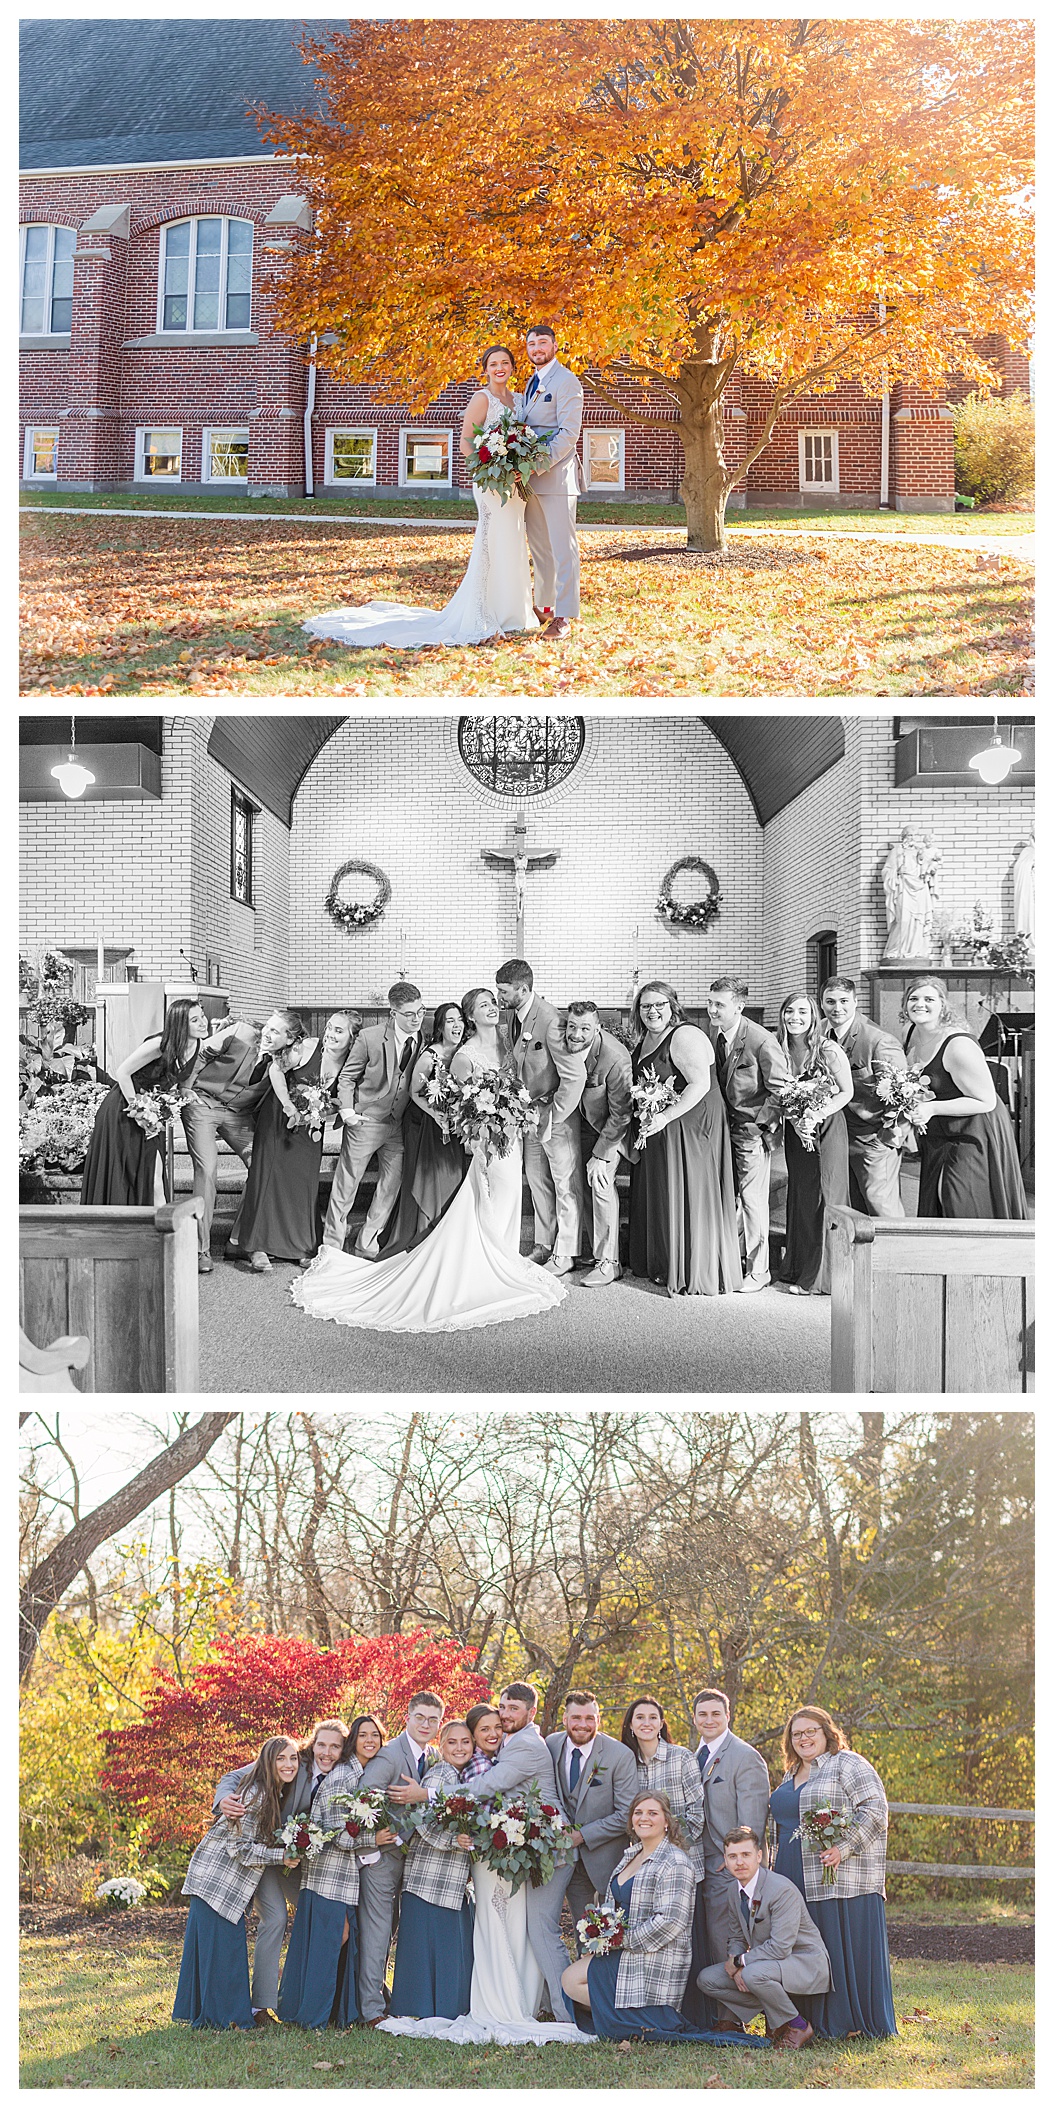 Ohio Fall wedding at St. Mary's Church in Millersburg, Ohio